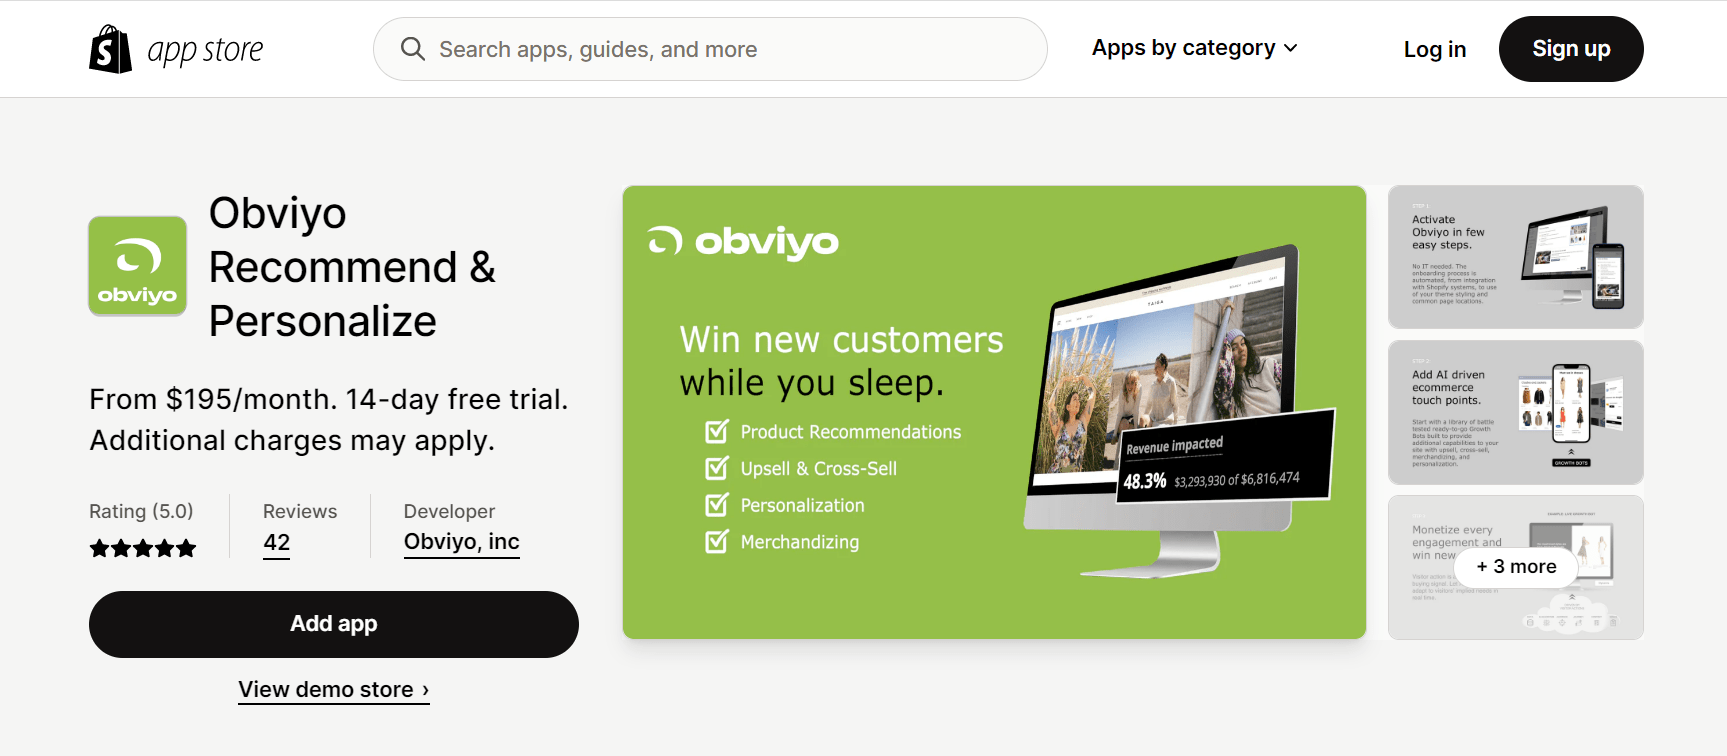 Obviyo recommendations